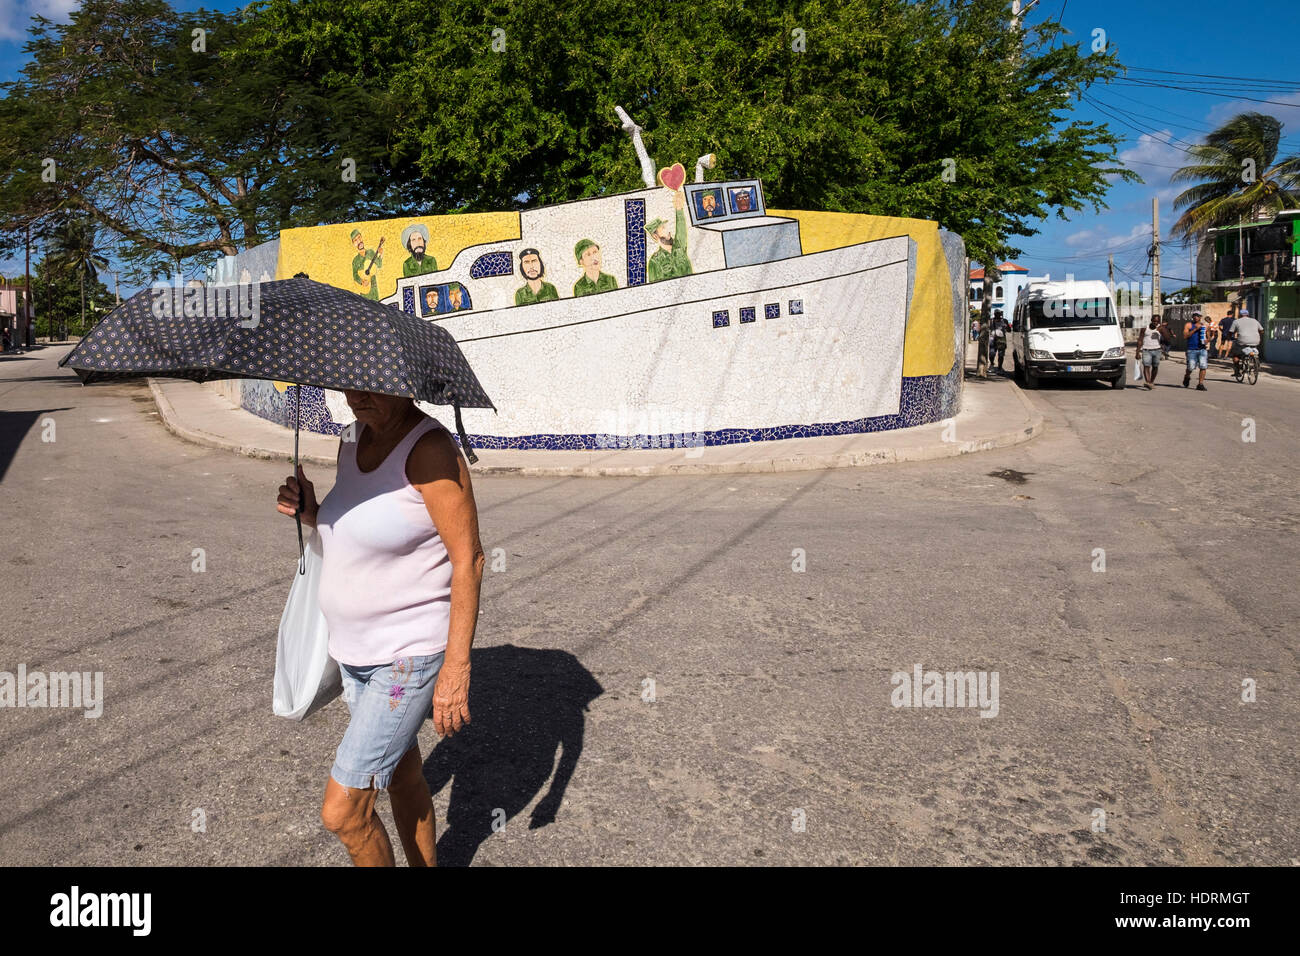 Woman with umbrella walks past tiled wall depicting the boat Granma with Che Guavara, Fidel Castro and others, Fusterland, La Havana, Cuba. Stock Photo